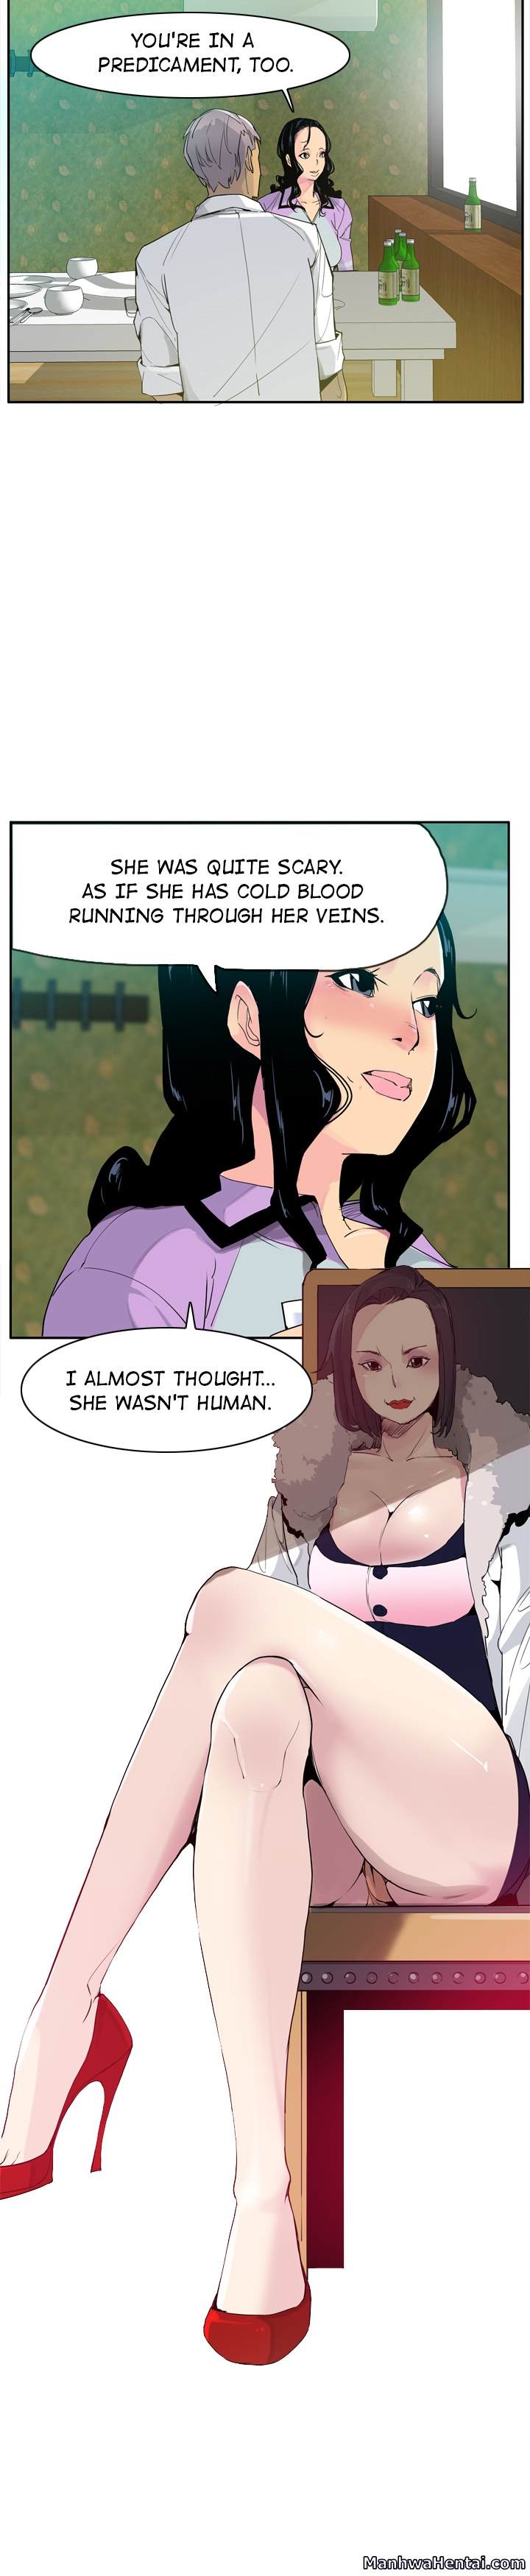 The Desperate Housewife - Chapter 25 Page 10